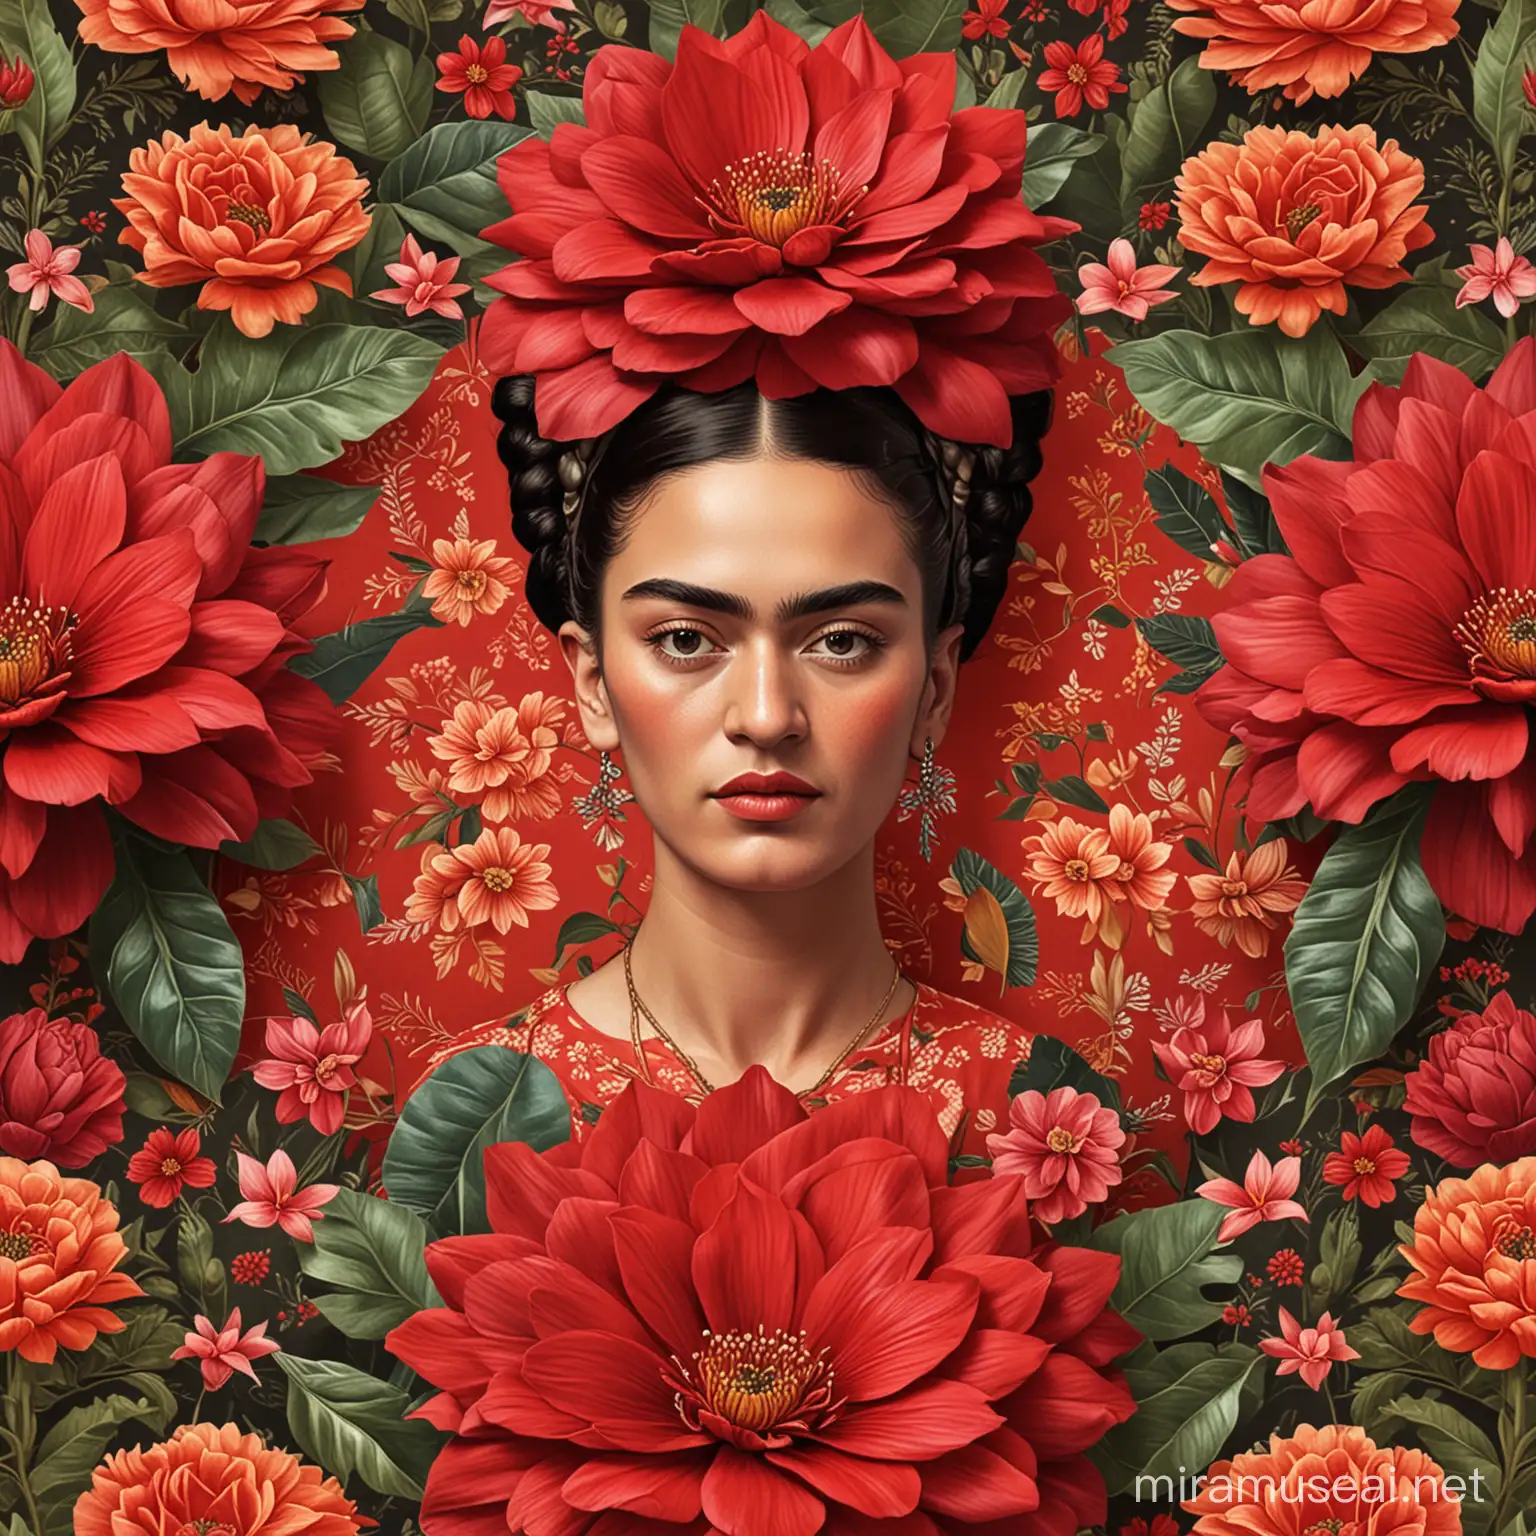 frida calo style background red
flowers